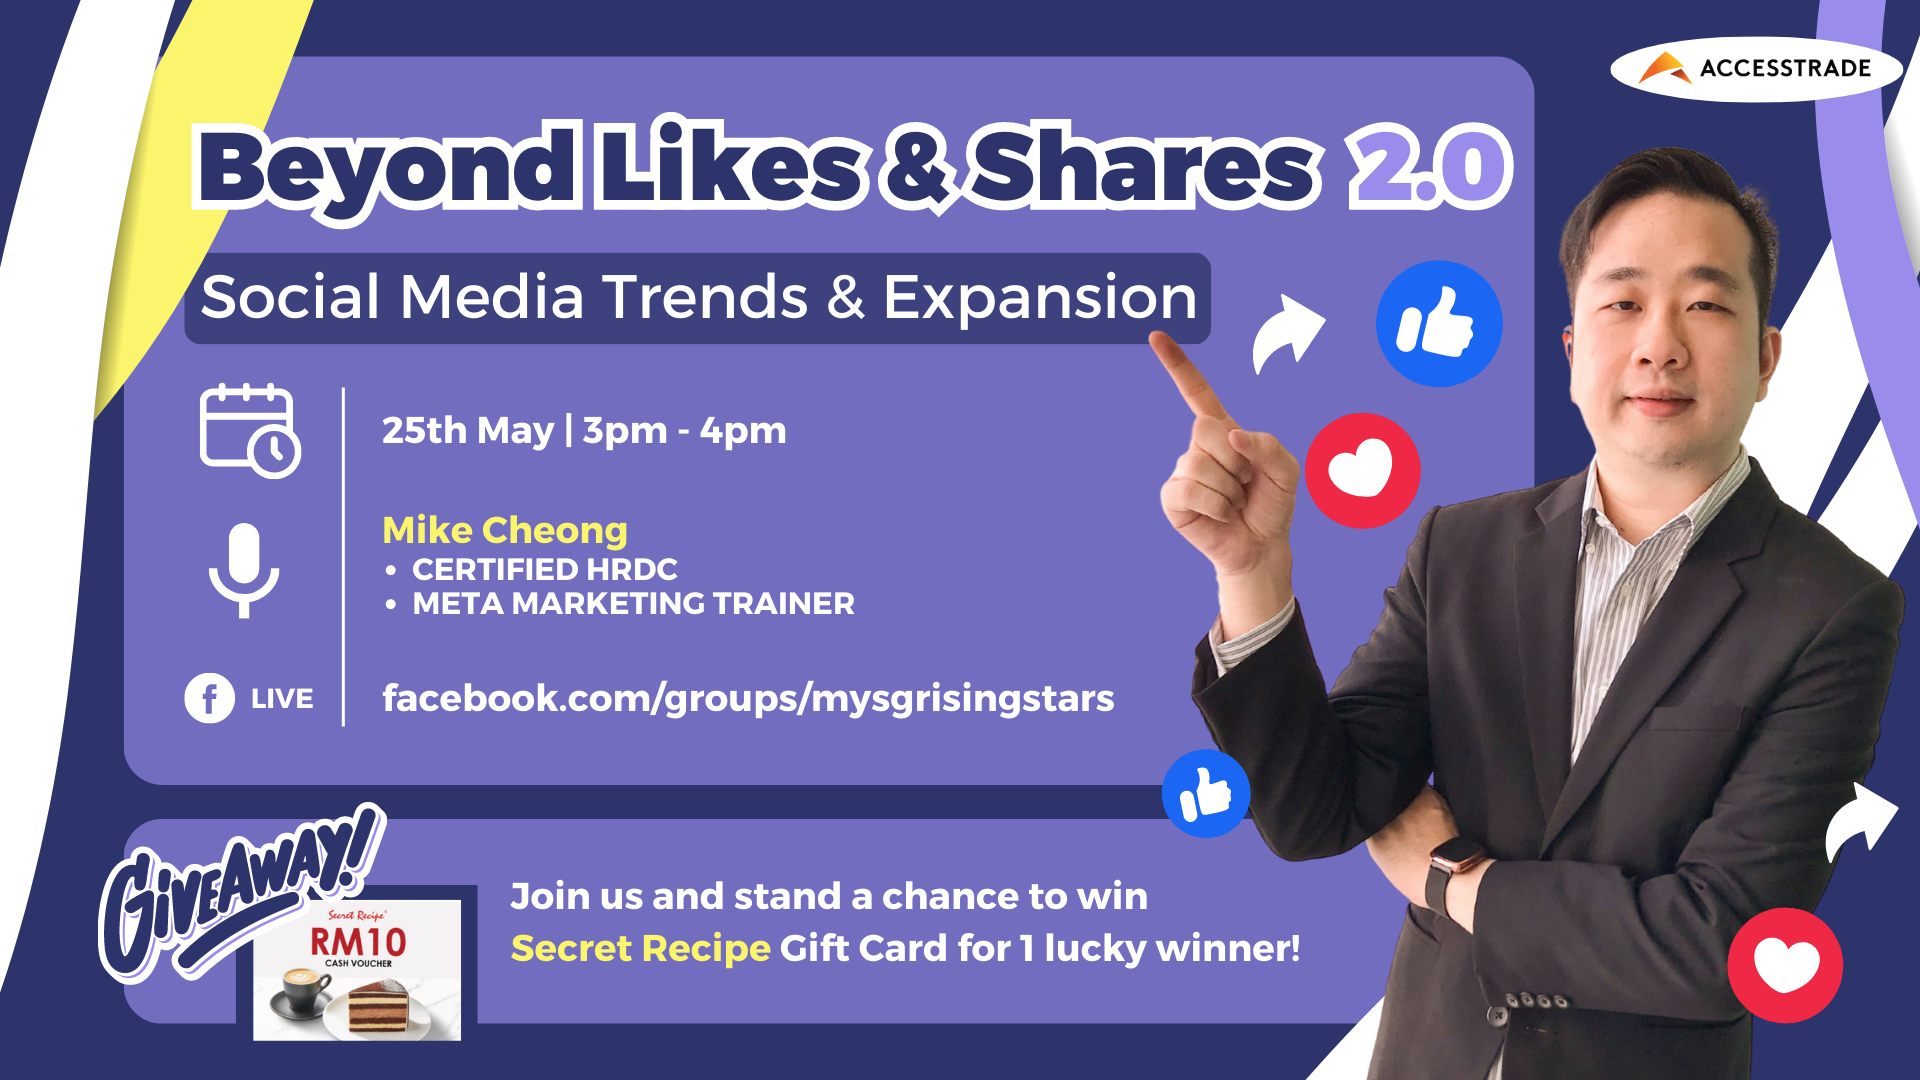 Beyond Likes & Shares 2.0: Social Media Trends & Expansion